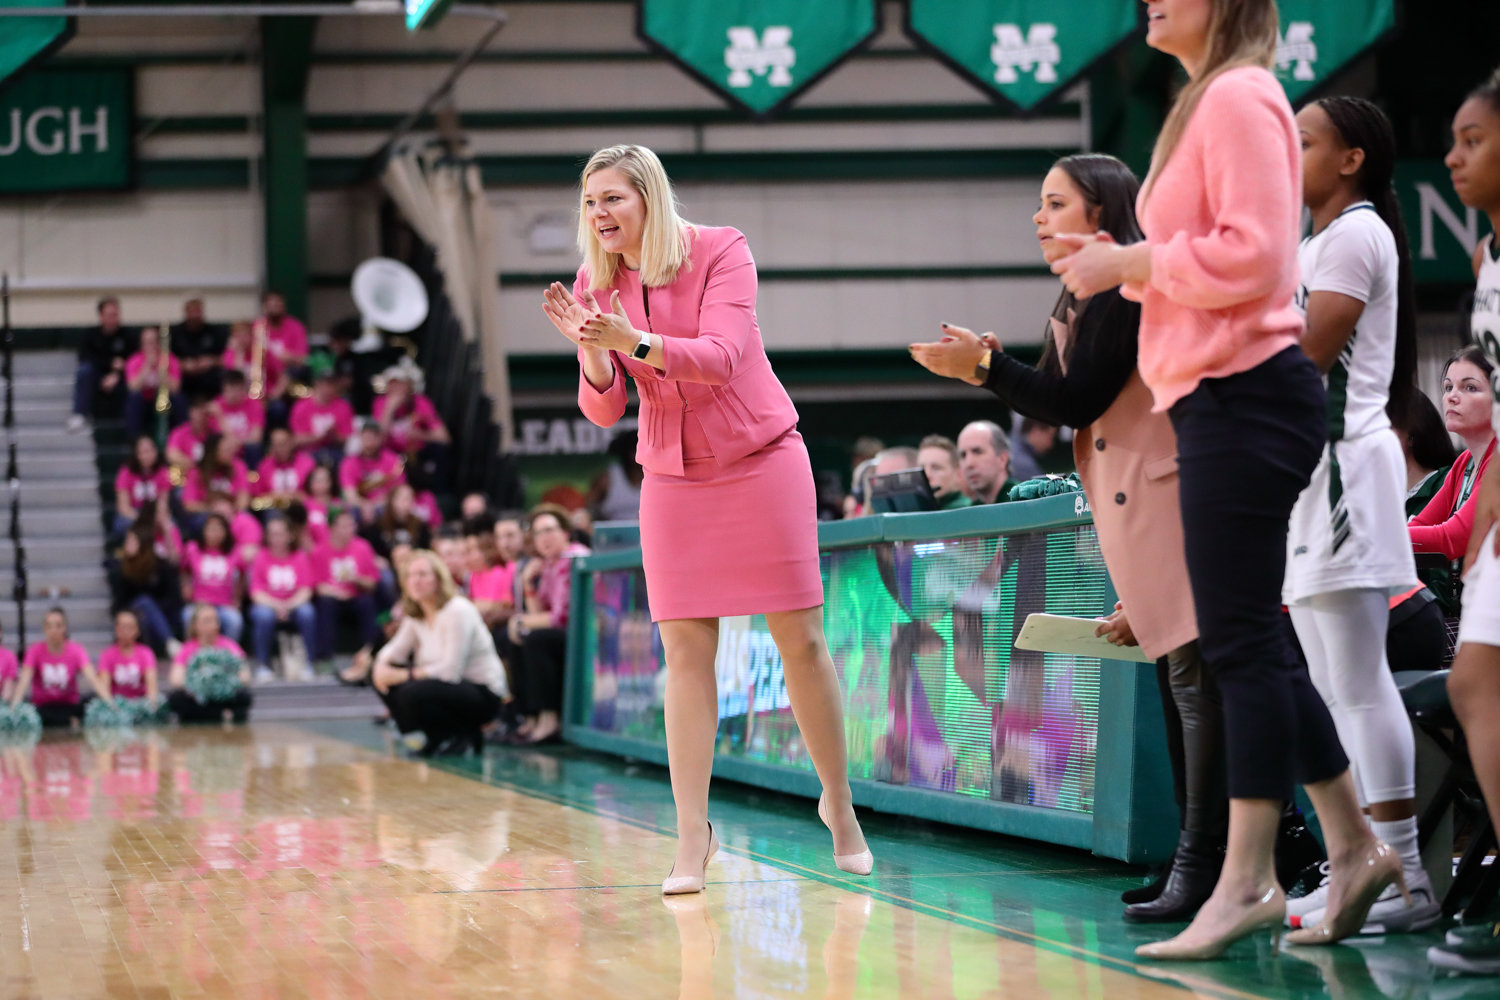 Manhattan head coach Heather Vulin never got to coach in the MAAC tournament last week as she had hoped to do after the coronavirus pandemic shuttered the Atlantic City tourney prior to the Jaspers’ first scheduled game.